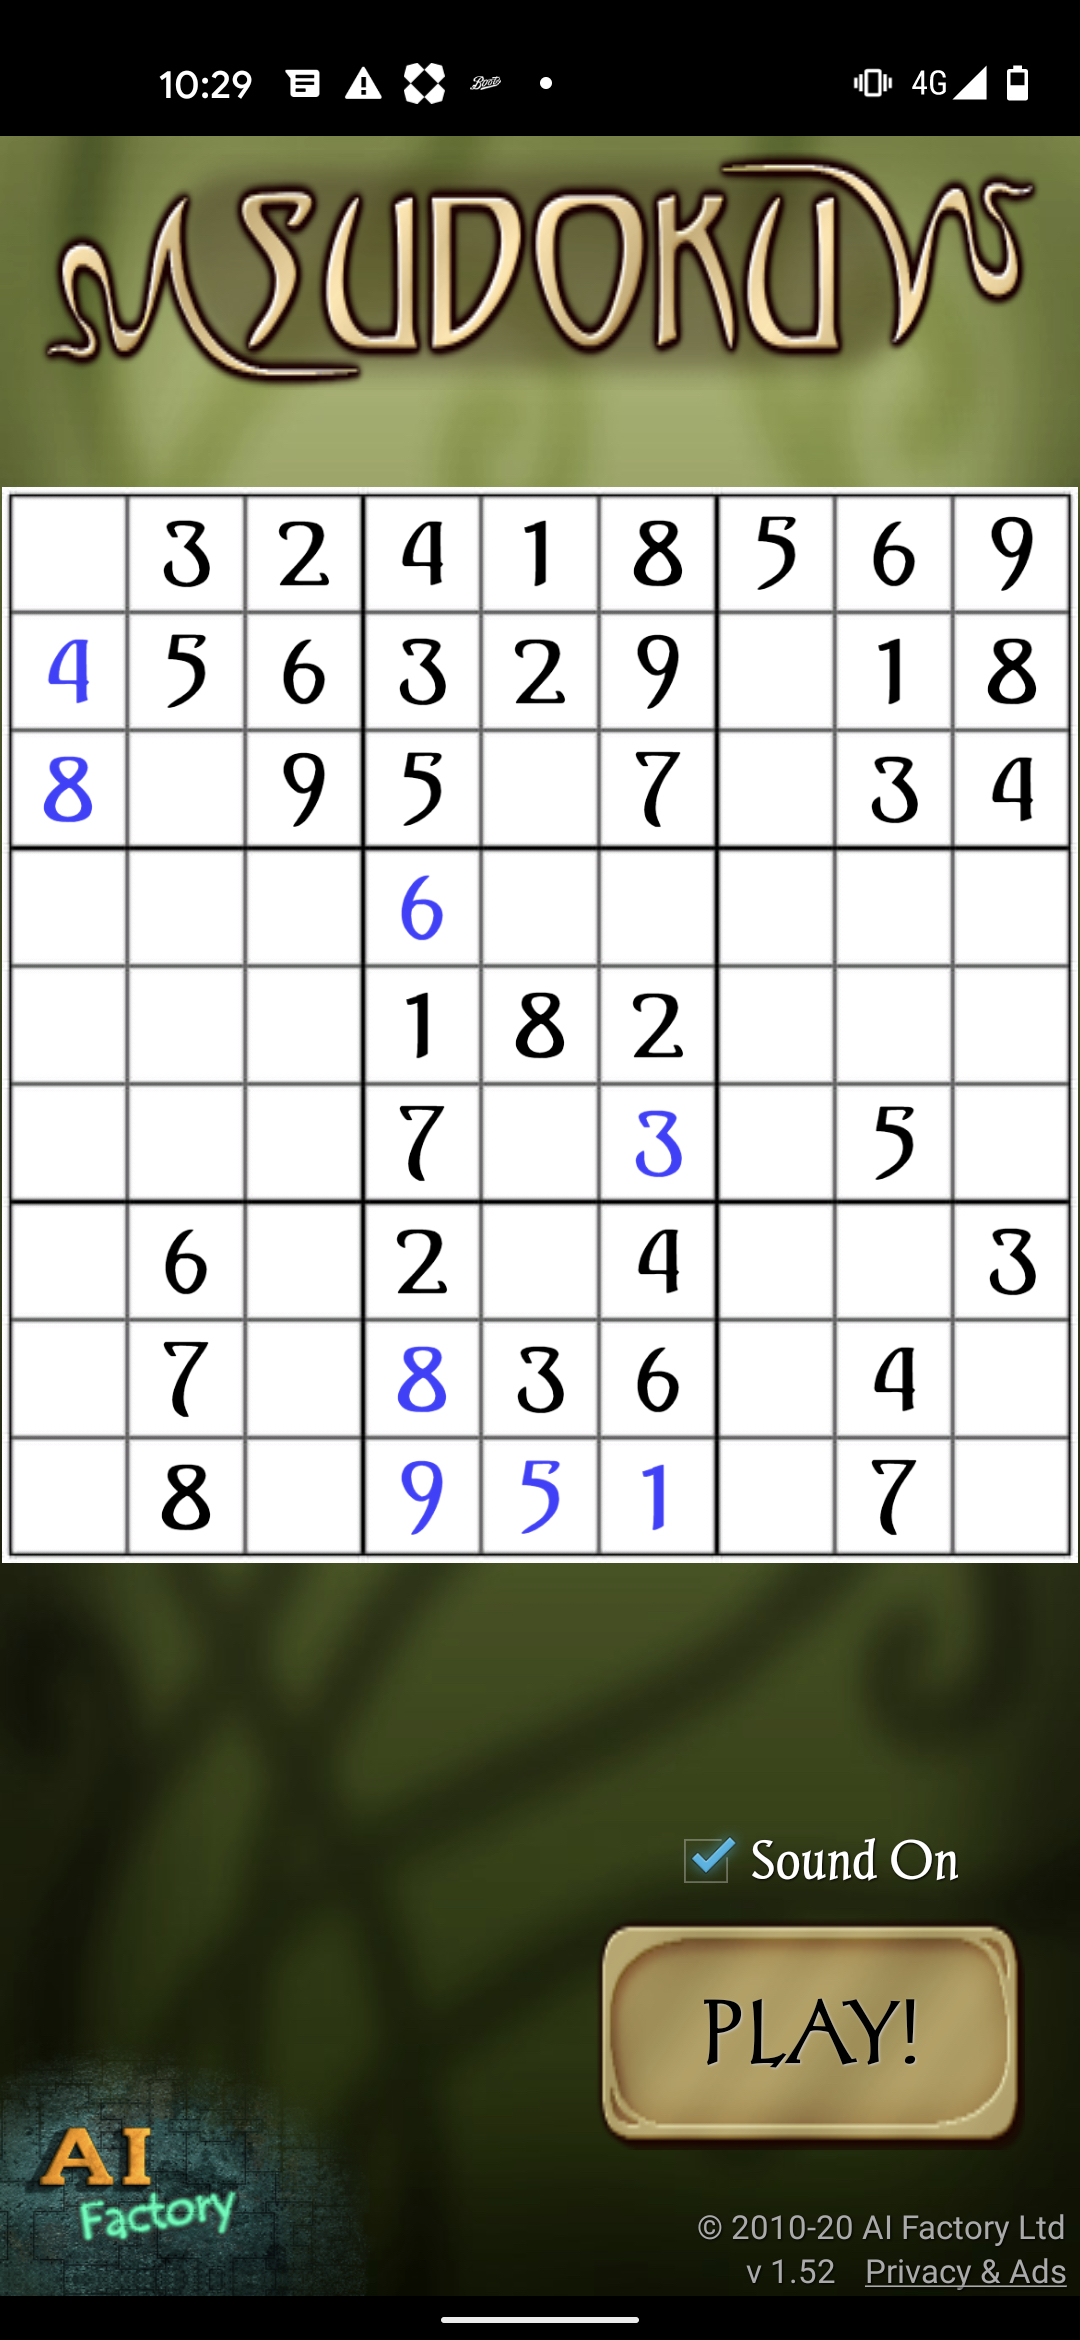 9 Best Sudoku iPhone Apps To Train Your Brain